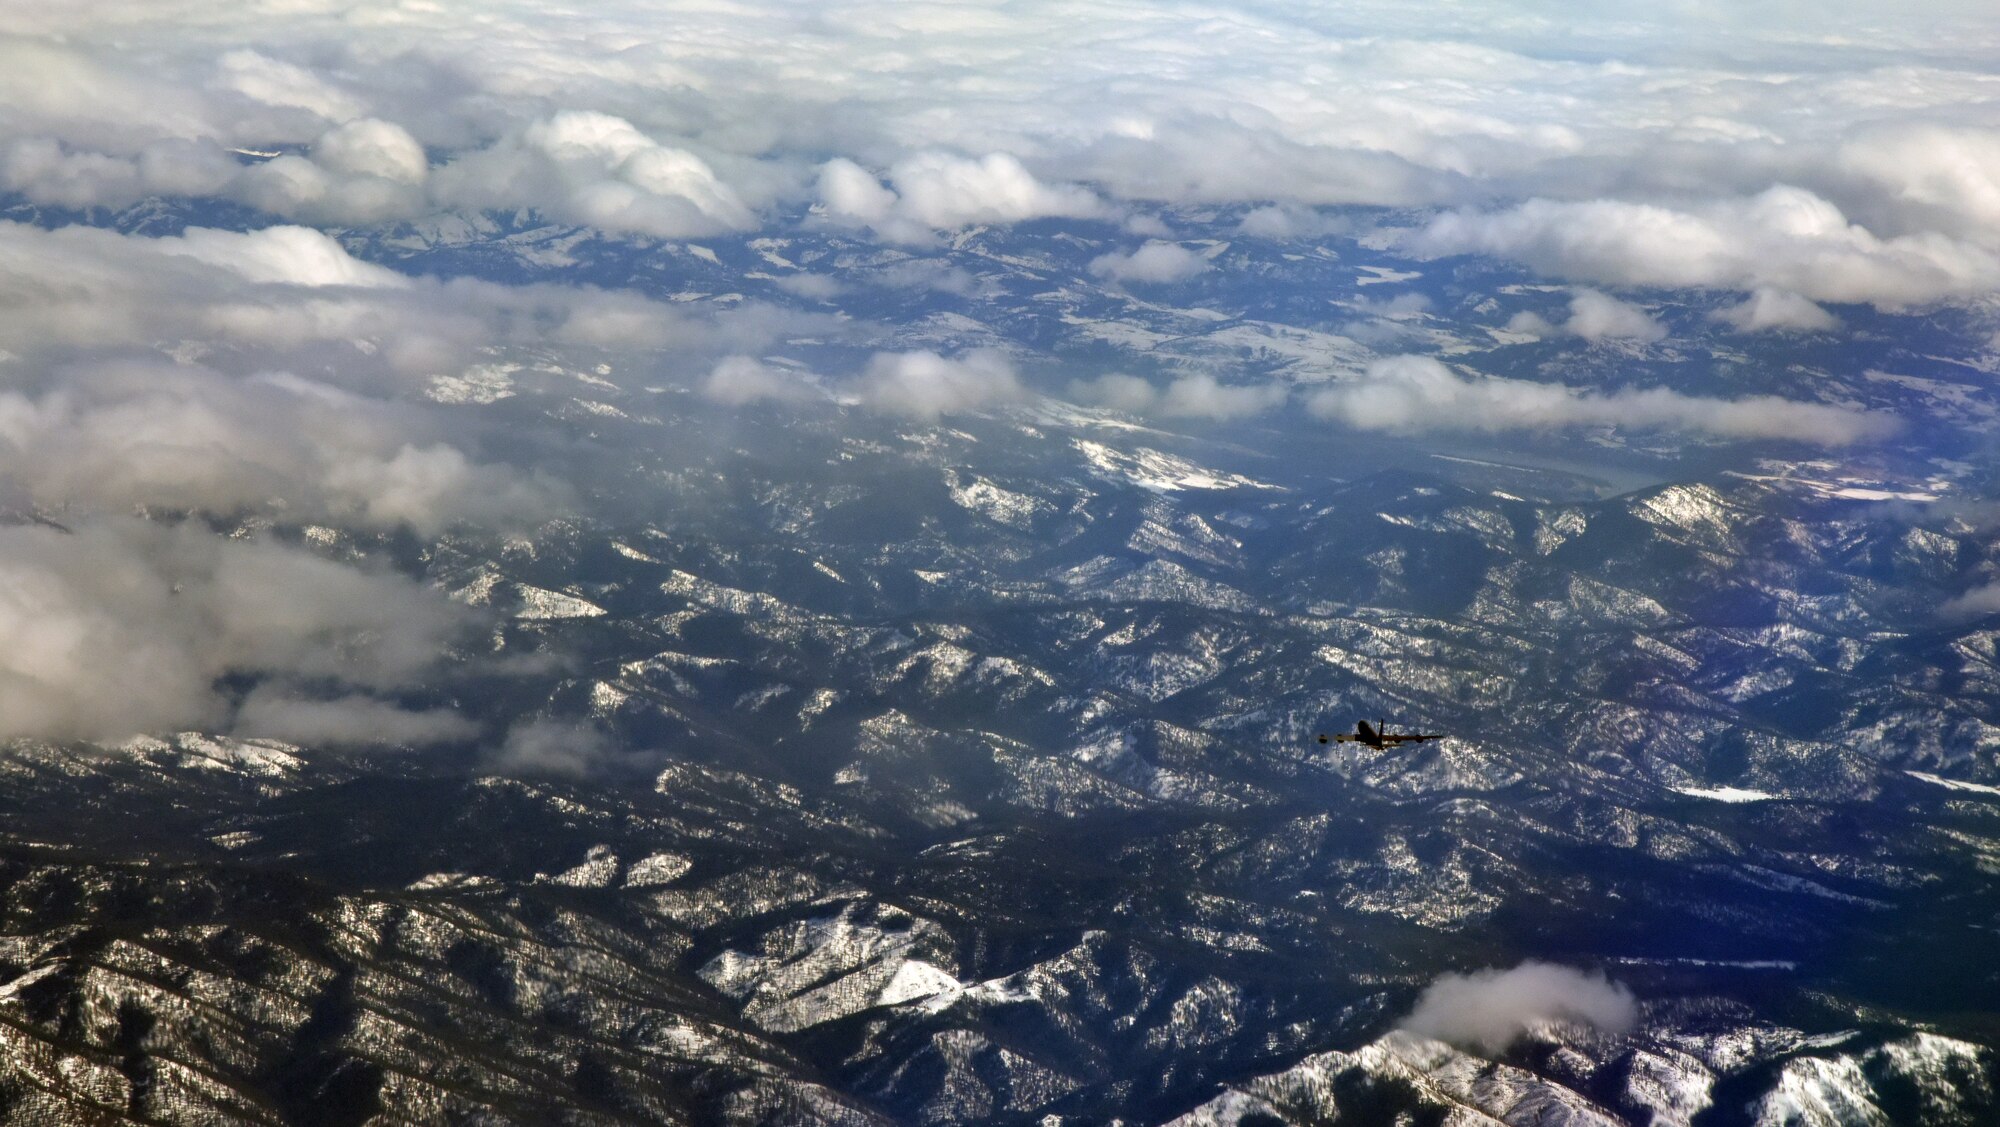 A KC-135 Stratotanker flies over mountains during exercise Titan Fury at Fairchild Air Force Base, Washington, March 9, 2018. The 92nd and 141st Air Refueling Wings teamed up with the 452nd Air Mobility Wing from March Air Reserve Base to focus on their total force partnerships throughout a week of alert-force operations. (U.S. Air Force photo/ Senior Airman Michala Weller)